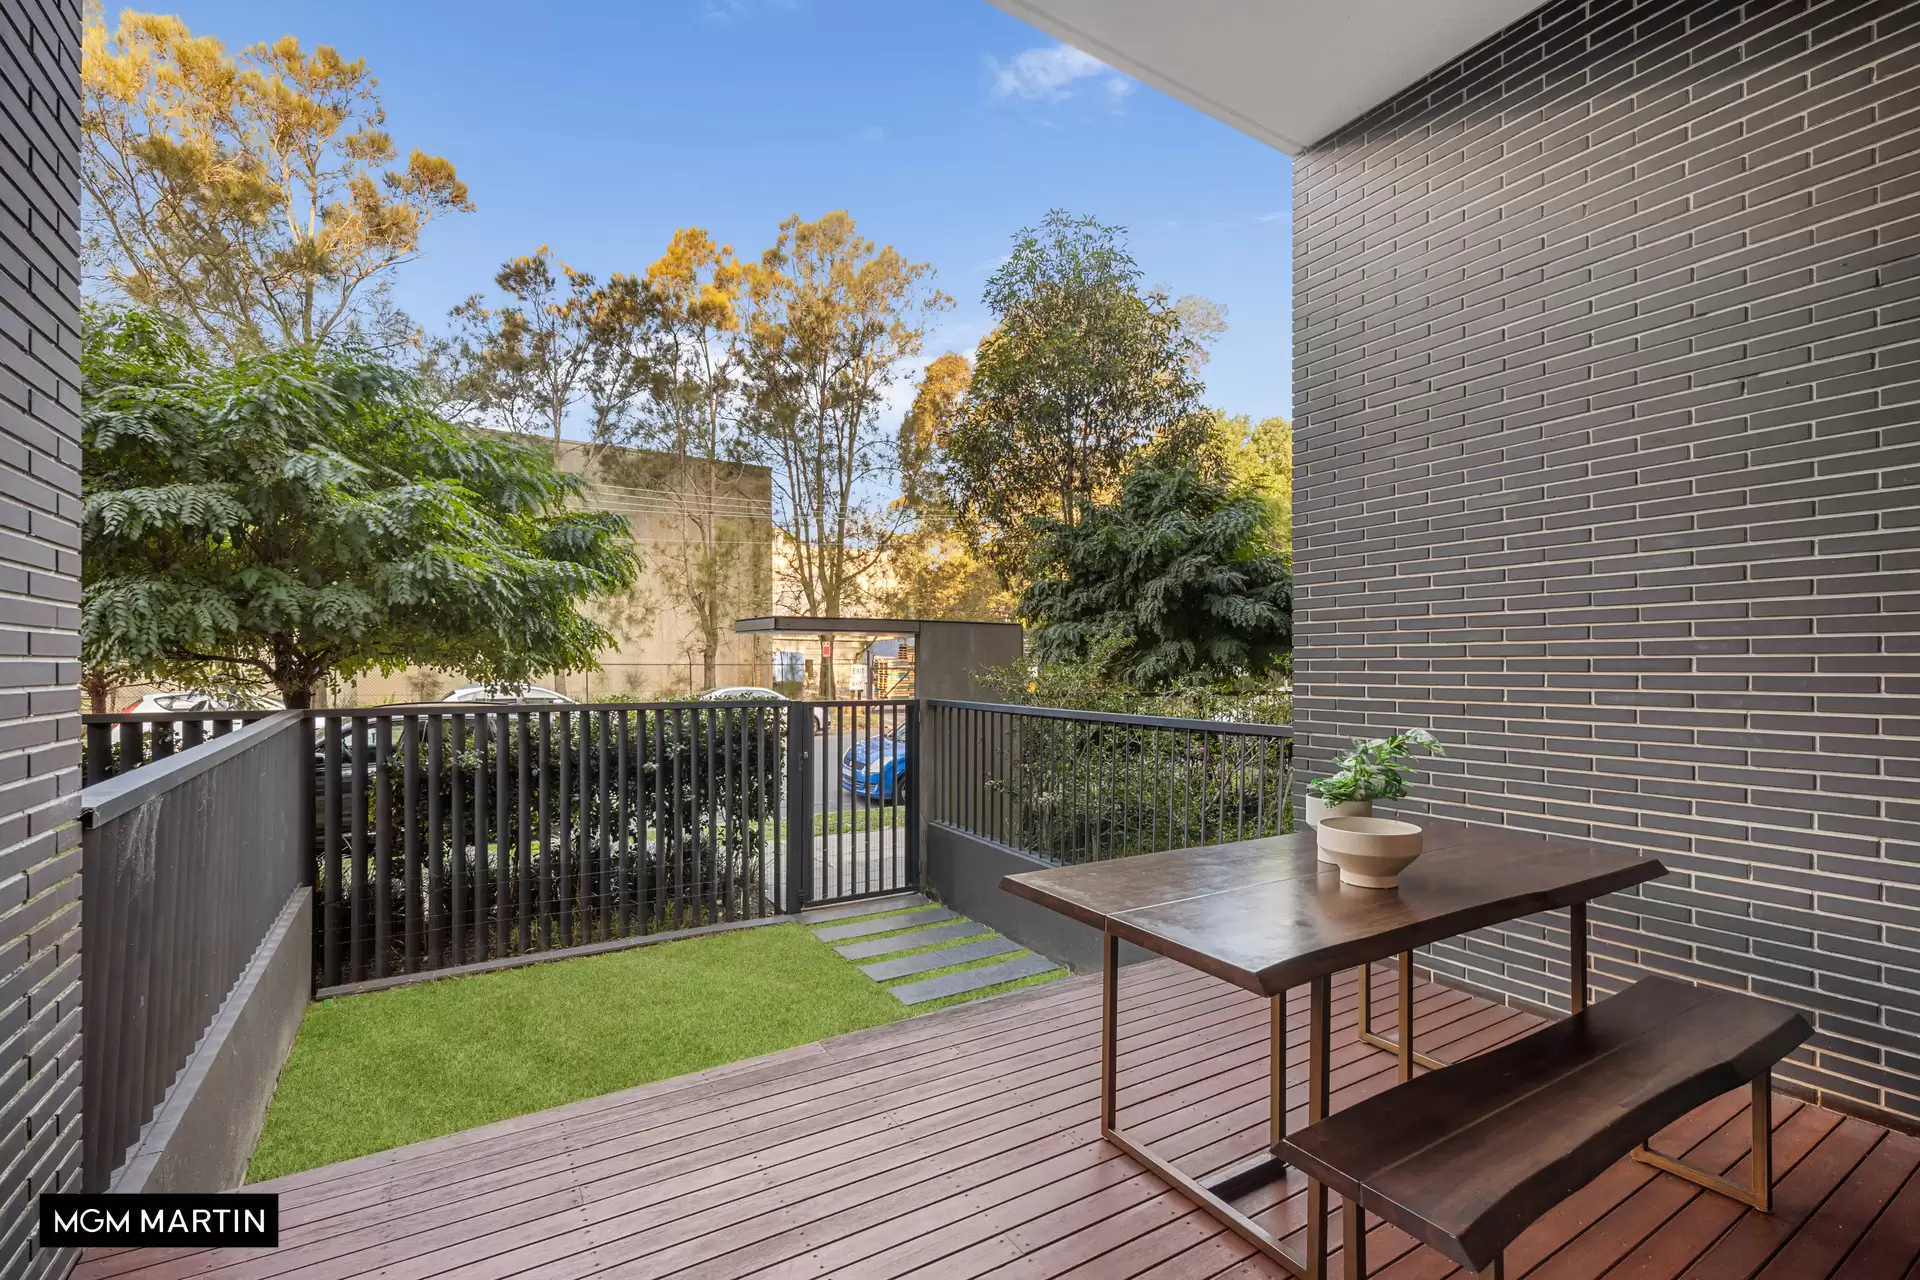 7/8 Crewe Place, Rosebery For Sale by MGM Martin - image 1